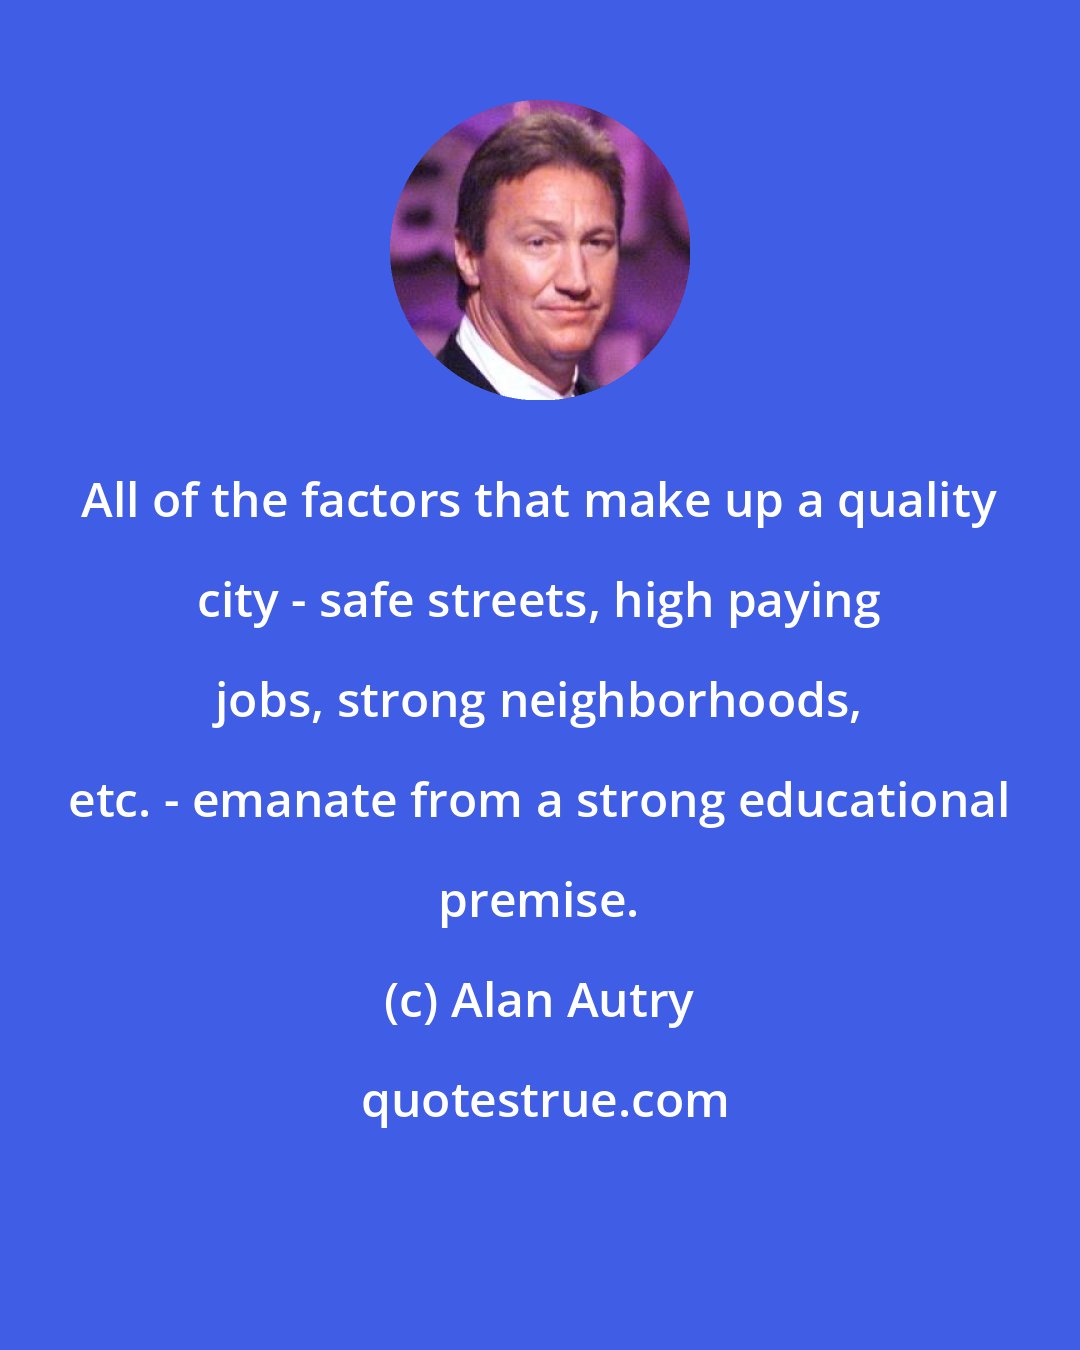 Alan Autry: All of the factors that make up a quality city - safe streets, high paying jobs, strong neighborhoods, etc. - emanate from a strong educational premise.